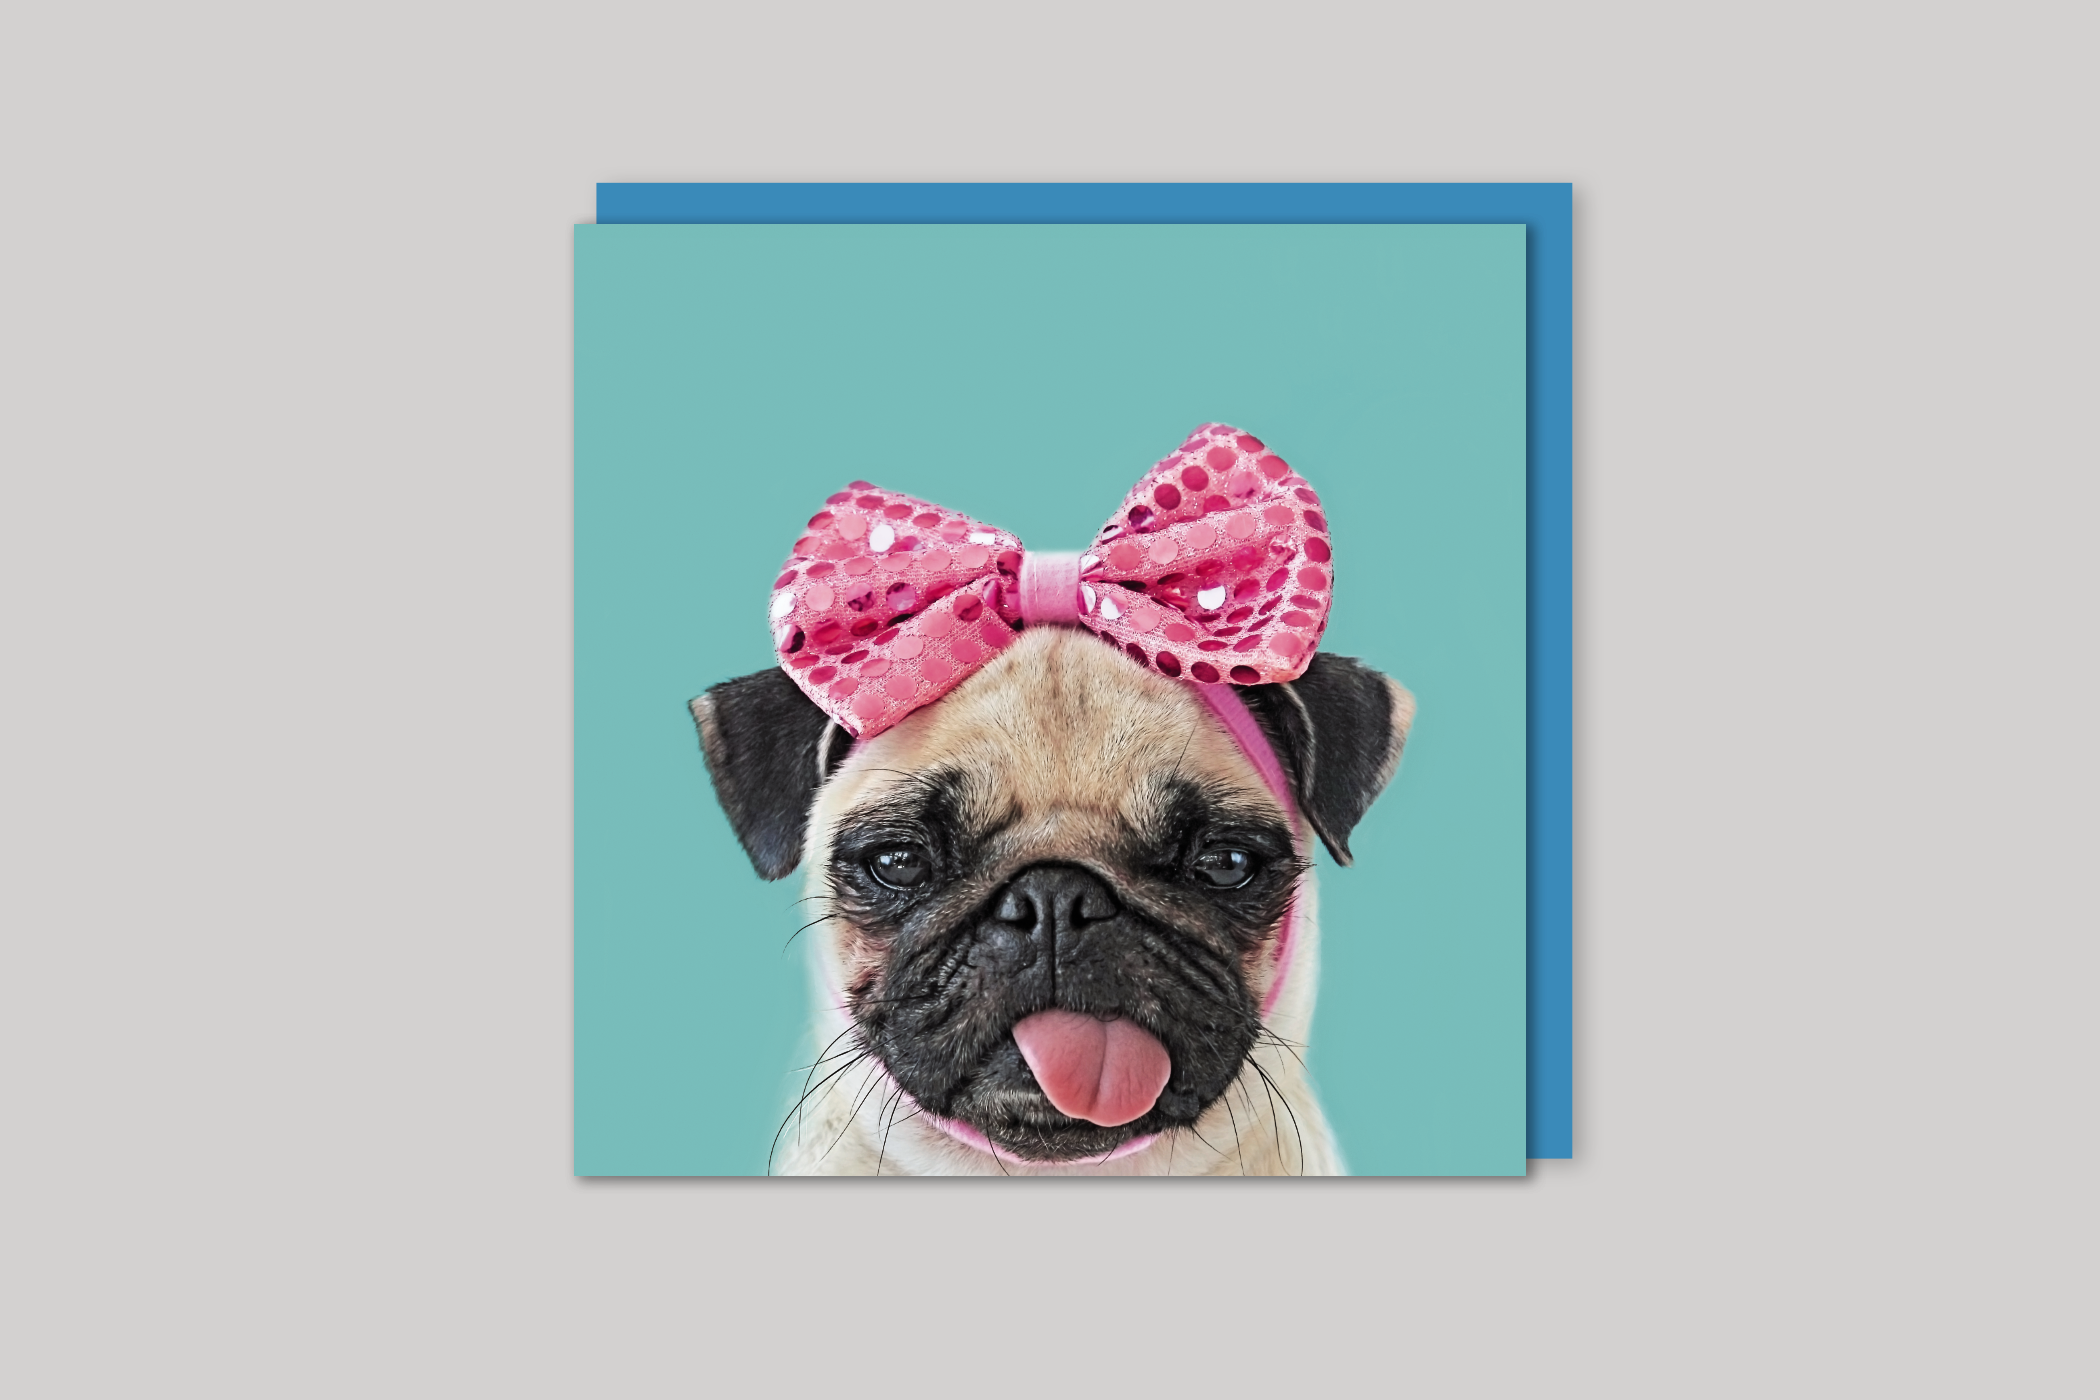 Pretty Pug from Wildthings range of greeting cards by Icon, back page.